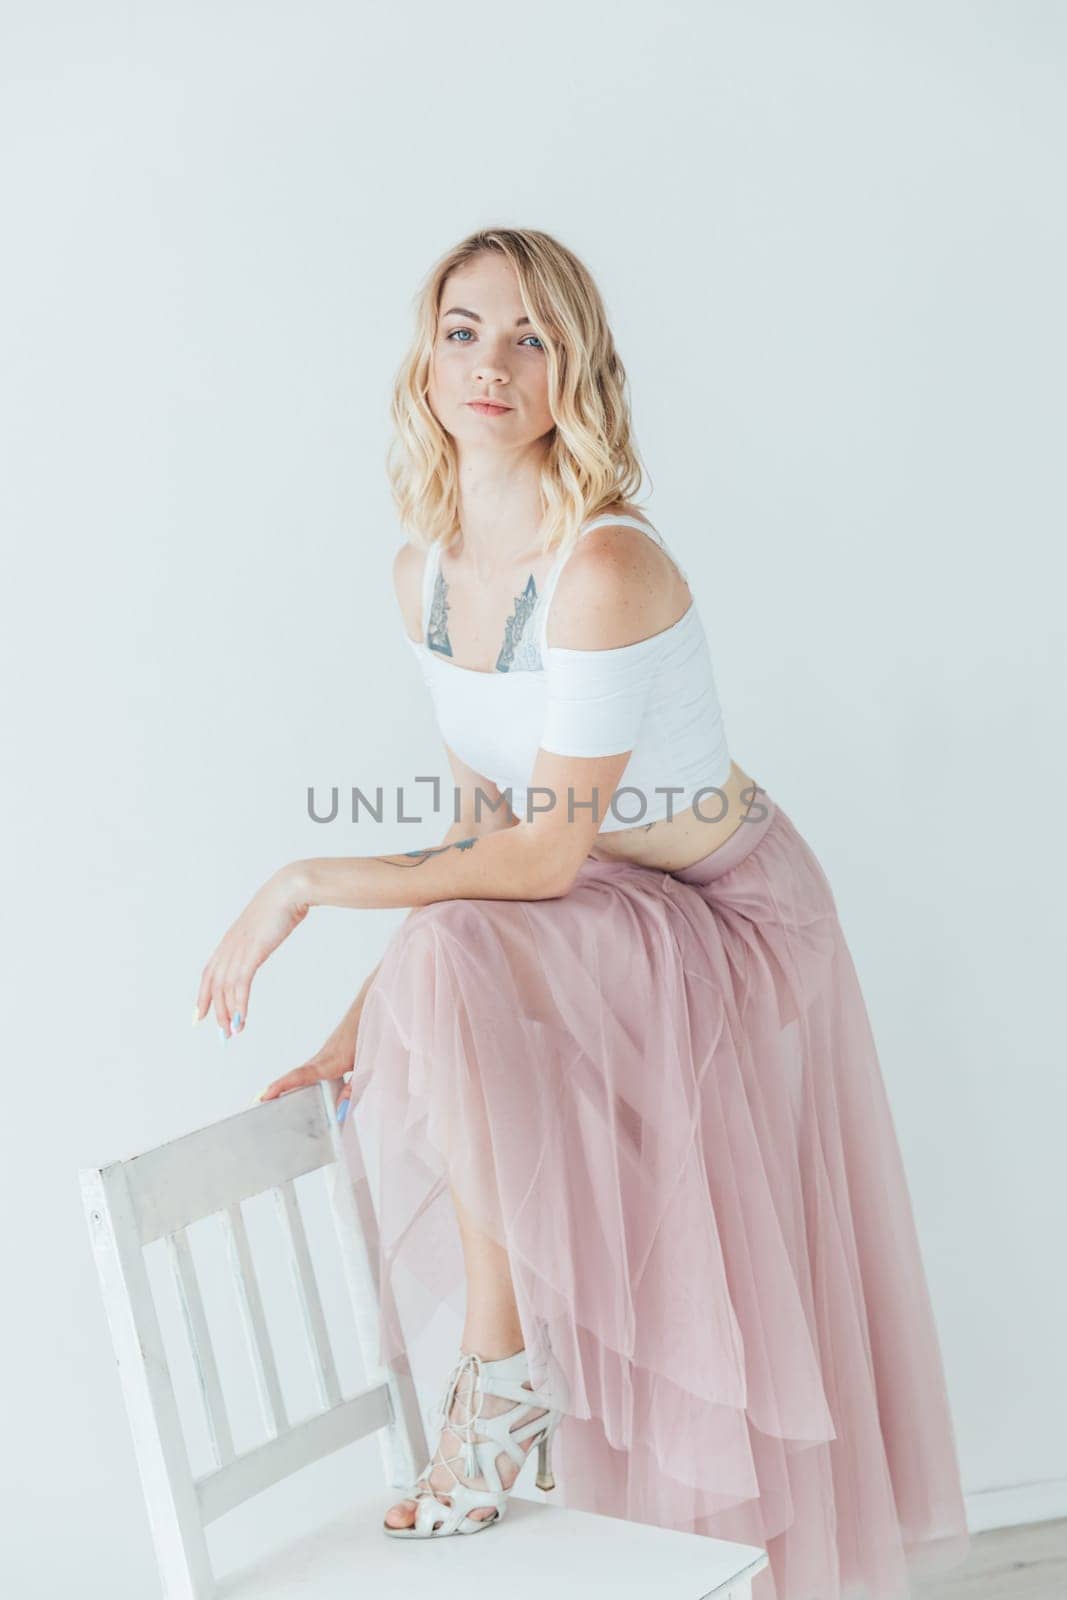 Tender beautiful woman posing on a chair in a bright room by Simakov